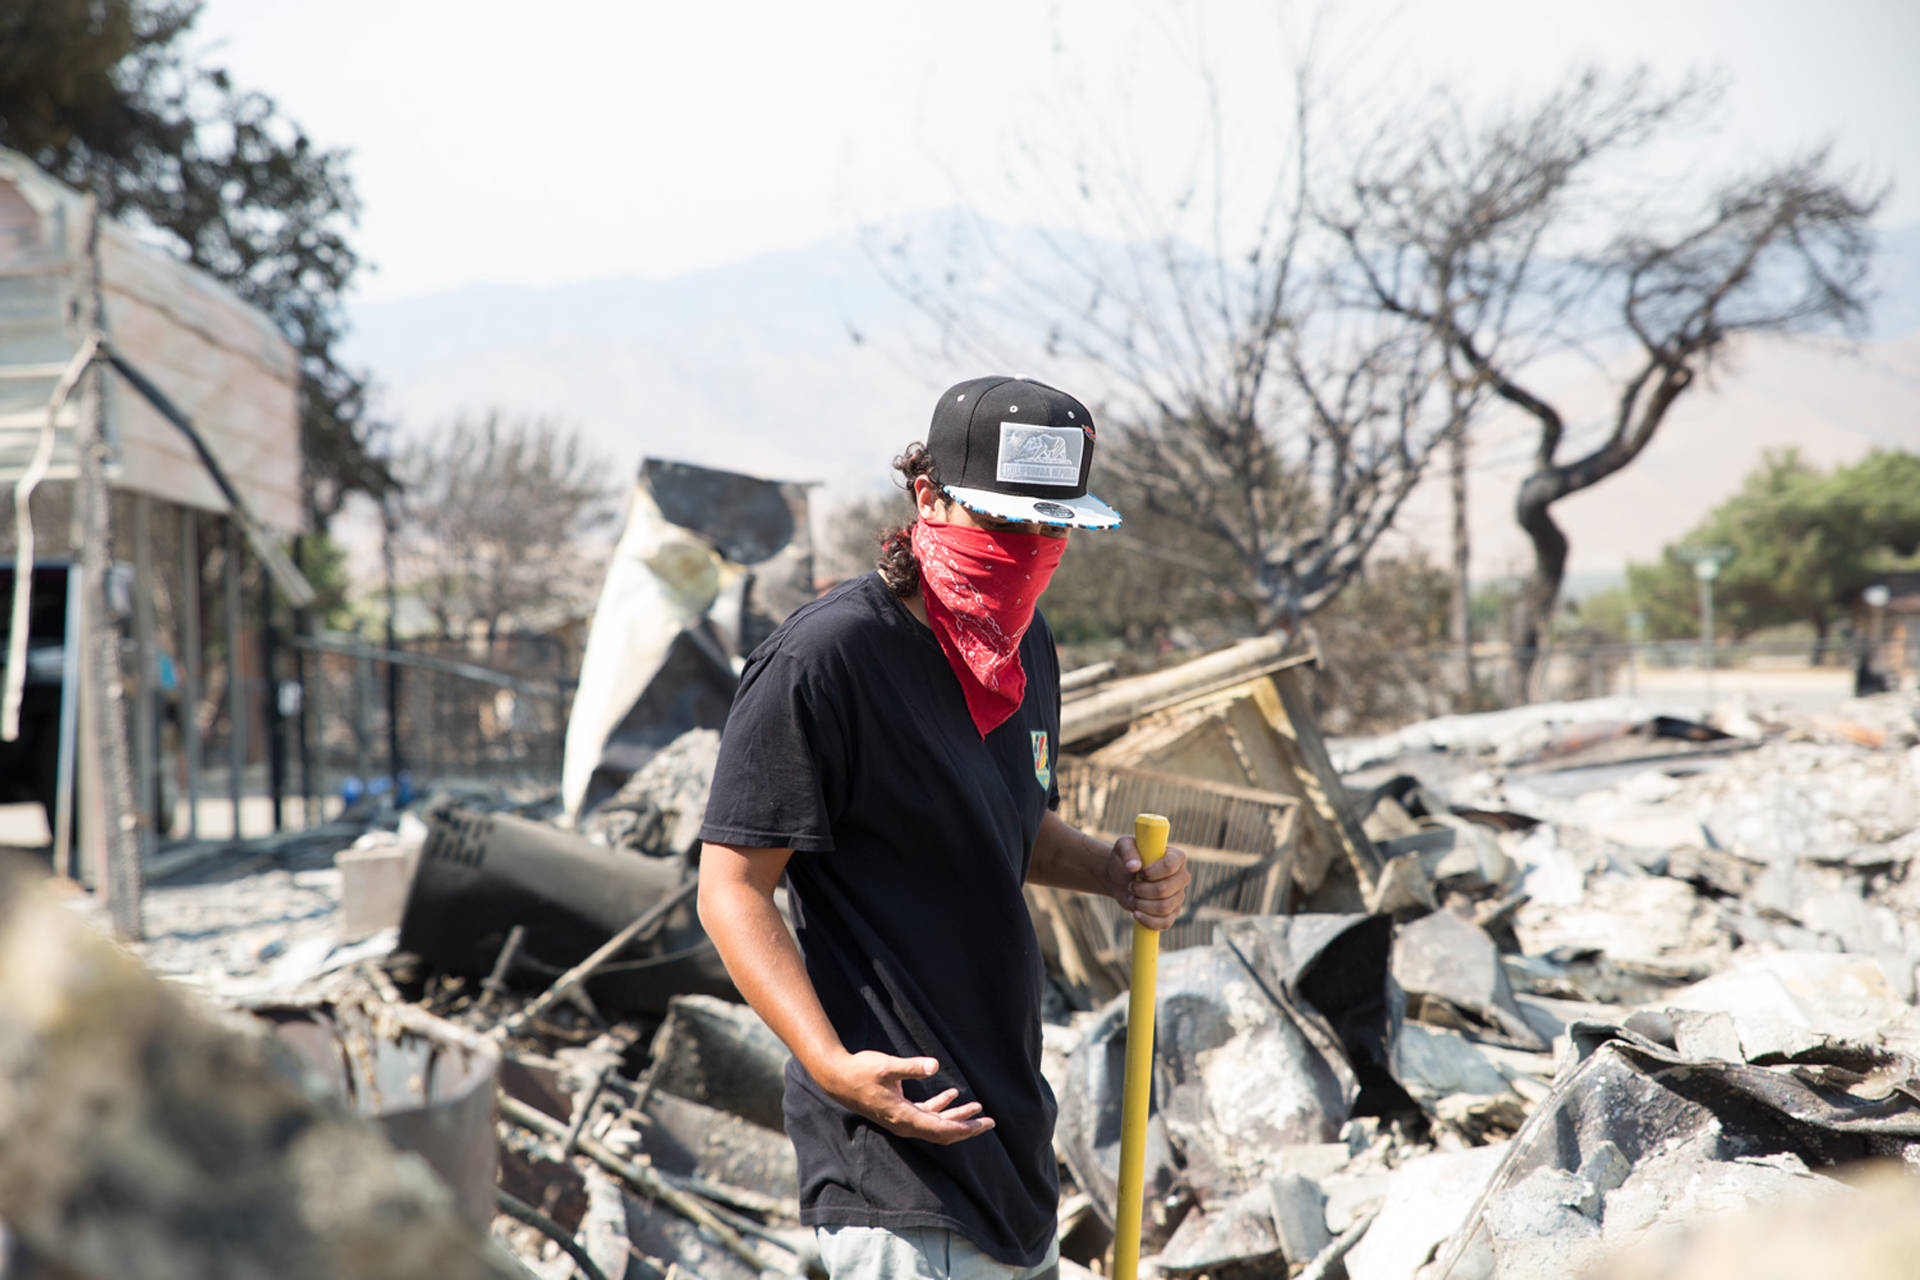 Aquivo Sun, 26, searches the rubble of his South Lake home June 26 for the remains of his missing dog. Sun and his girlfriend, Brittany Thompson, 24, already found one of their dogs among the debris days earlier. They lived off Goat Ranch Road, a neighborhood the Erskine Fire turned to ashes.  Brian Rinker/KQED